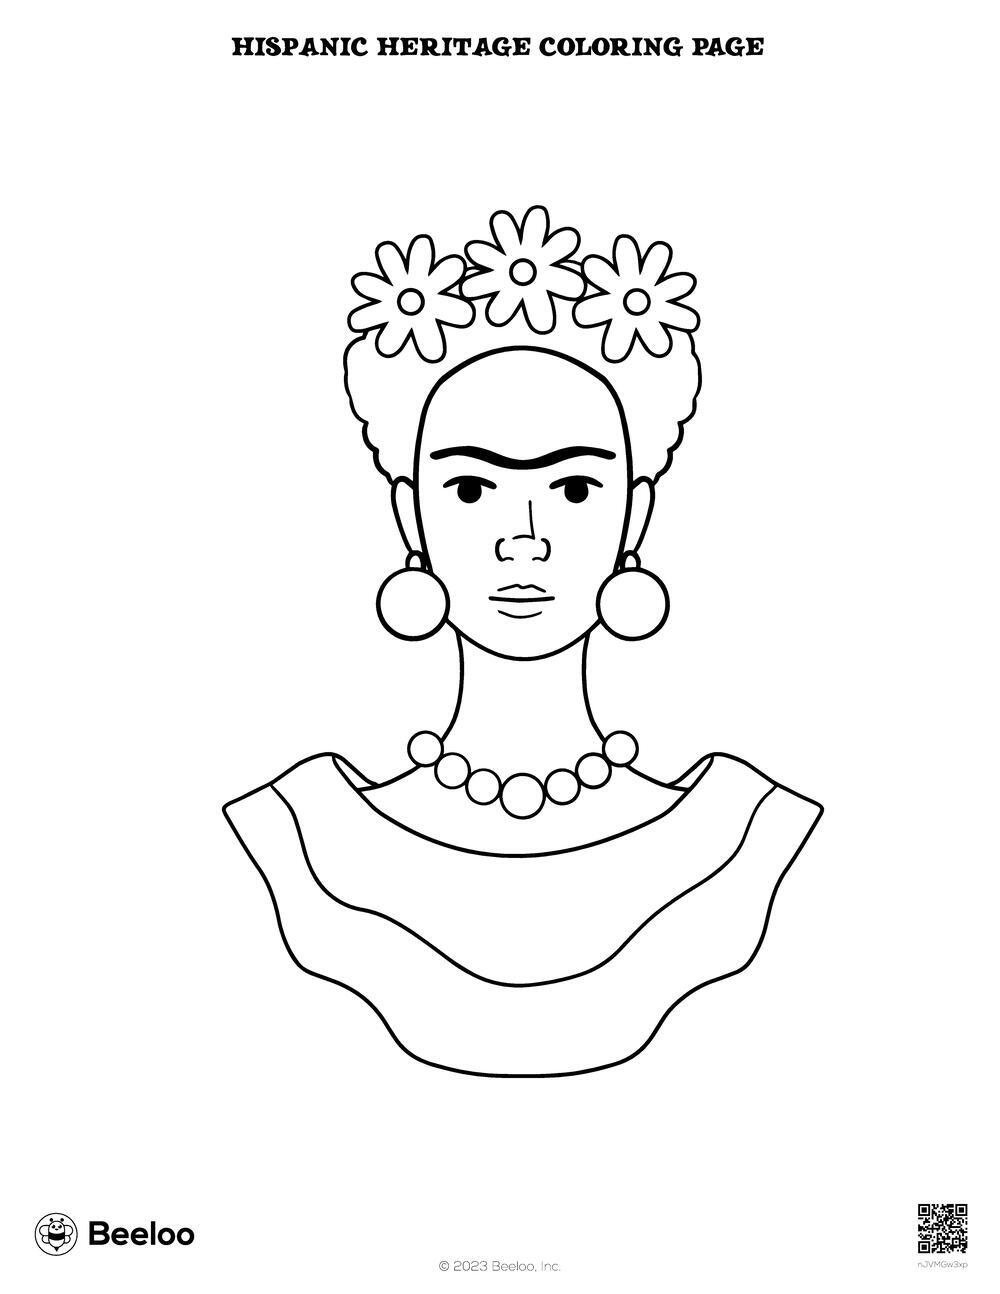 Hispanic heritage coloring page â printable crafts and activities for kids